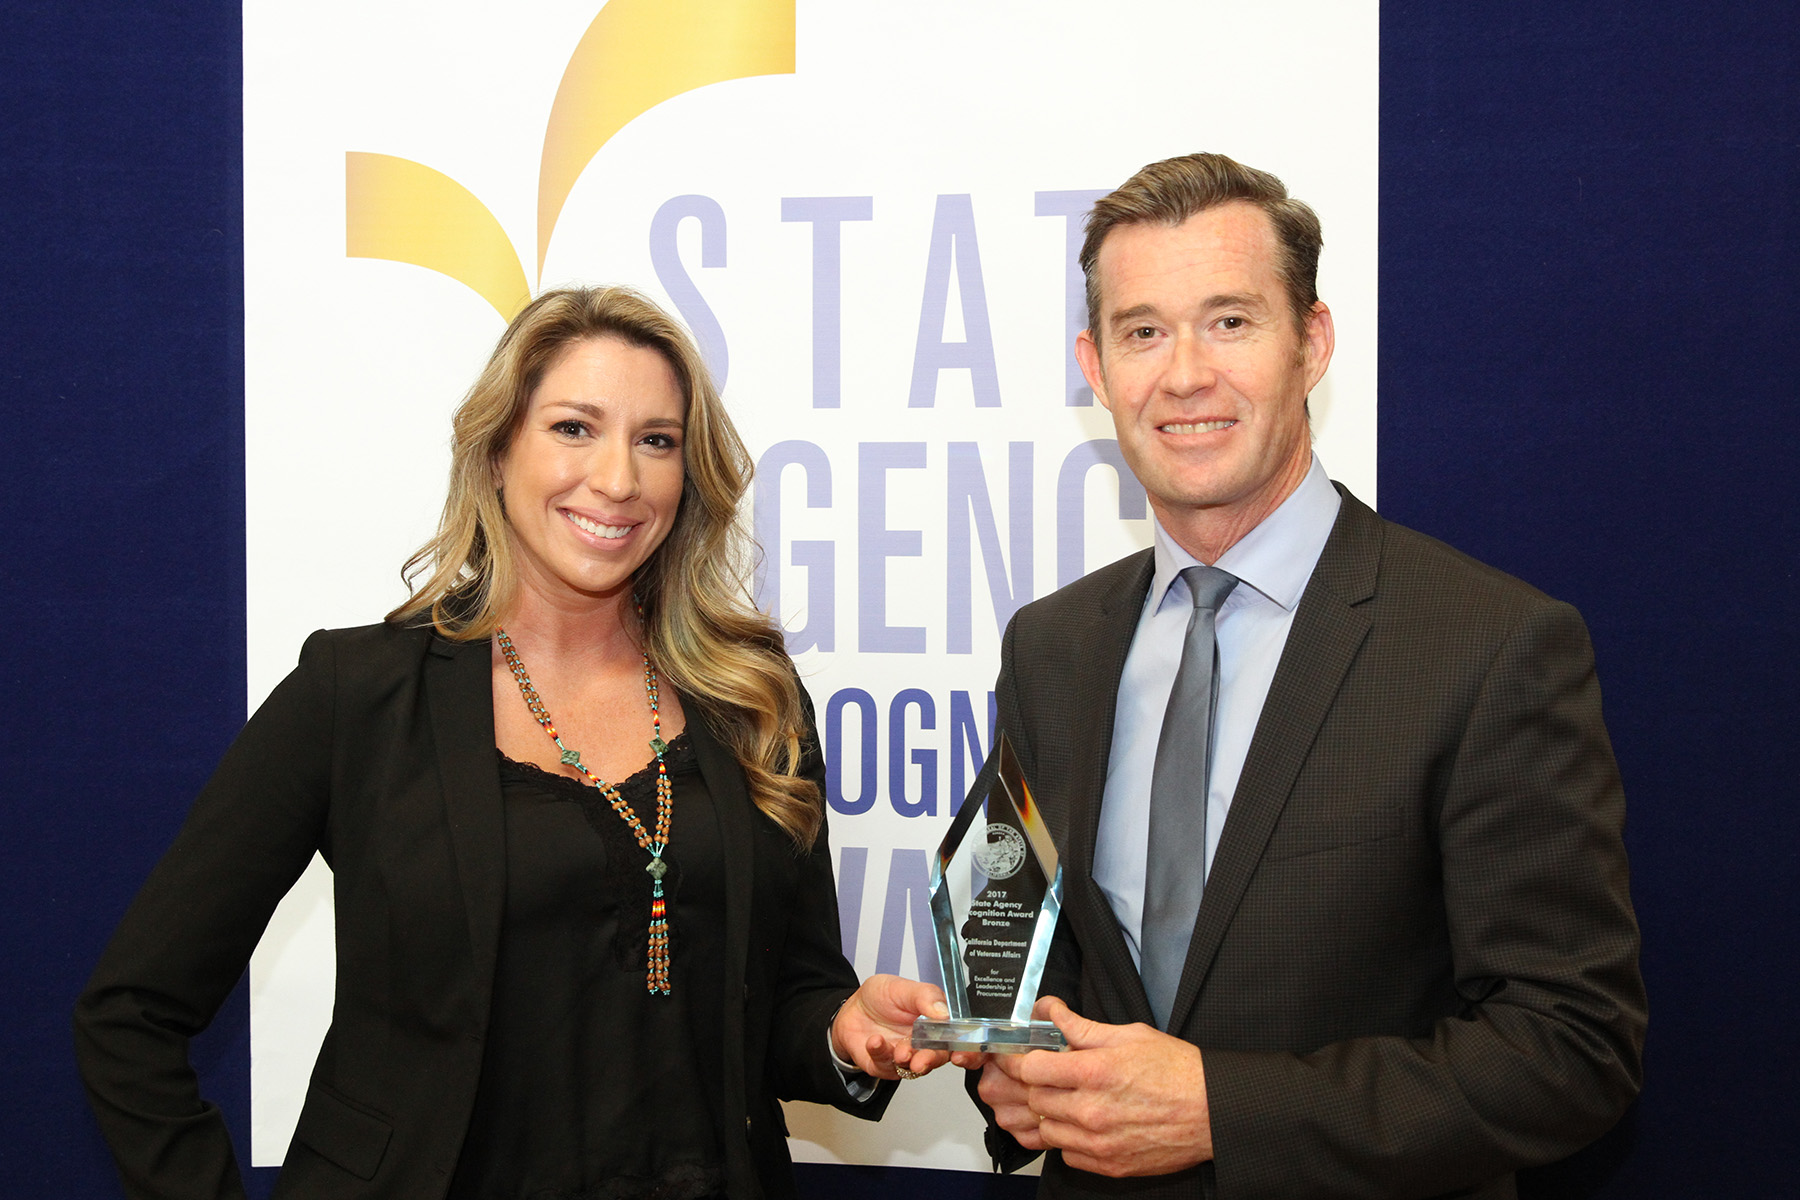 Jaime Jones and Keith Boylan accept the Bronze Agency of the Year award for the California Department of Veterans Affairs